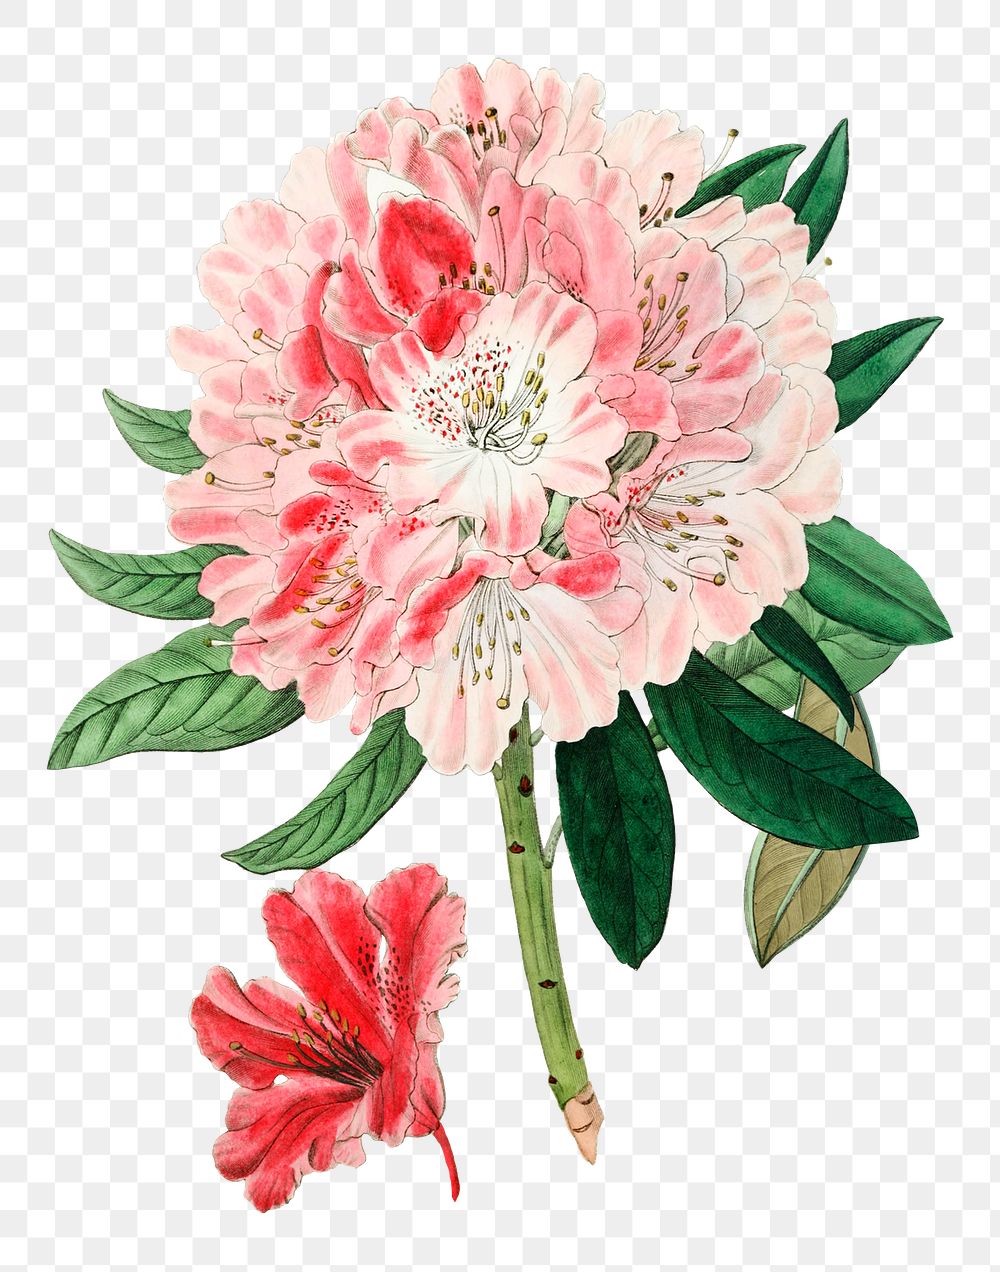 Vintage rhododendron blooming illustration png sticker